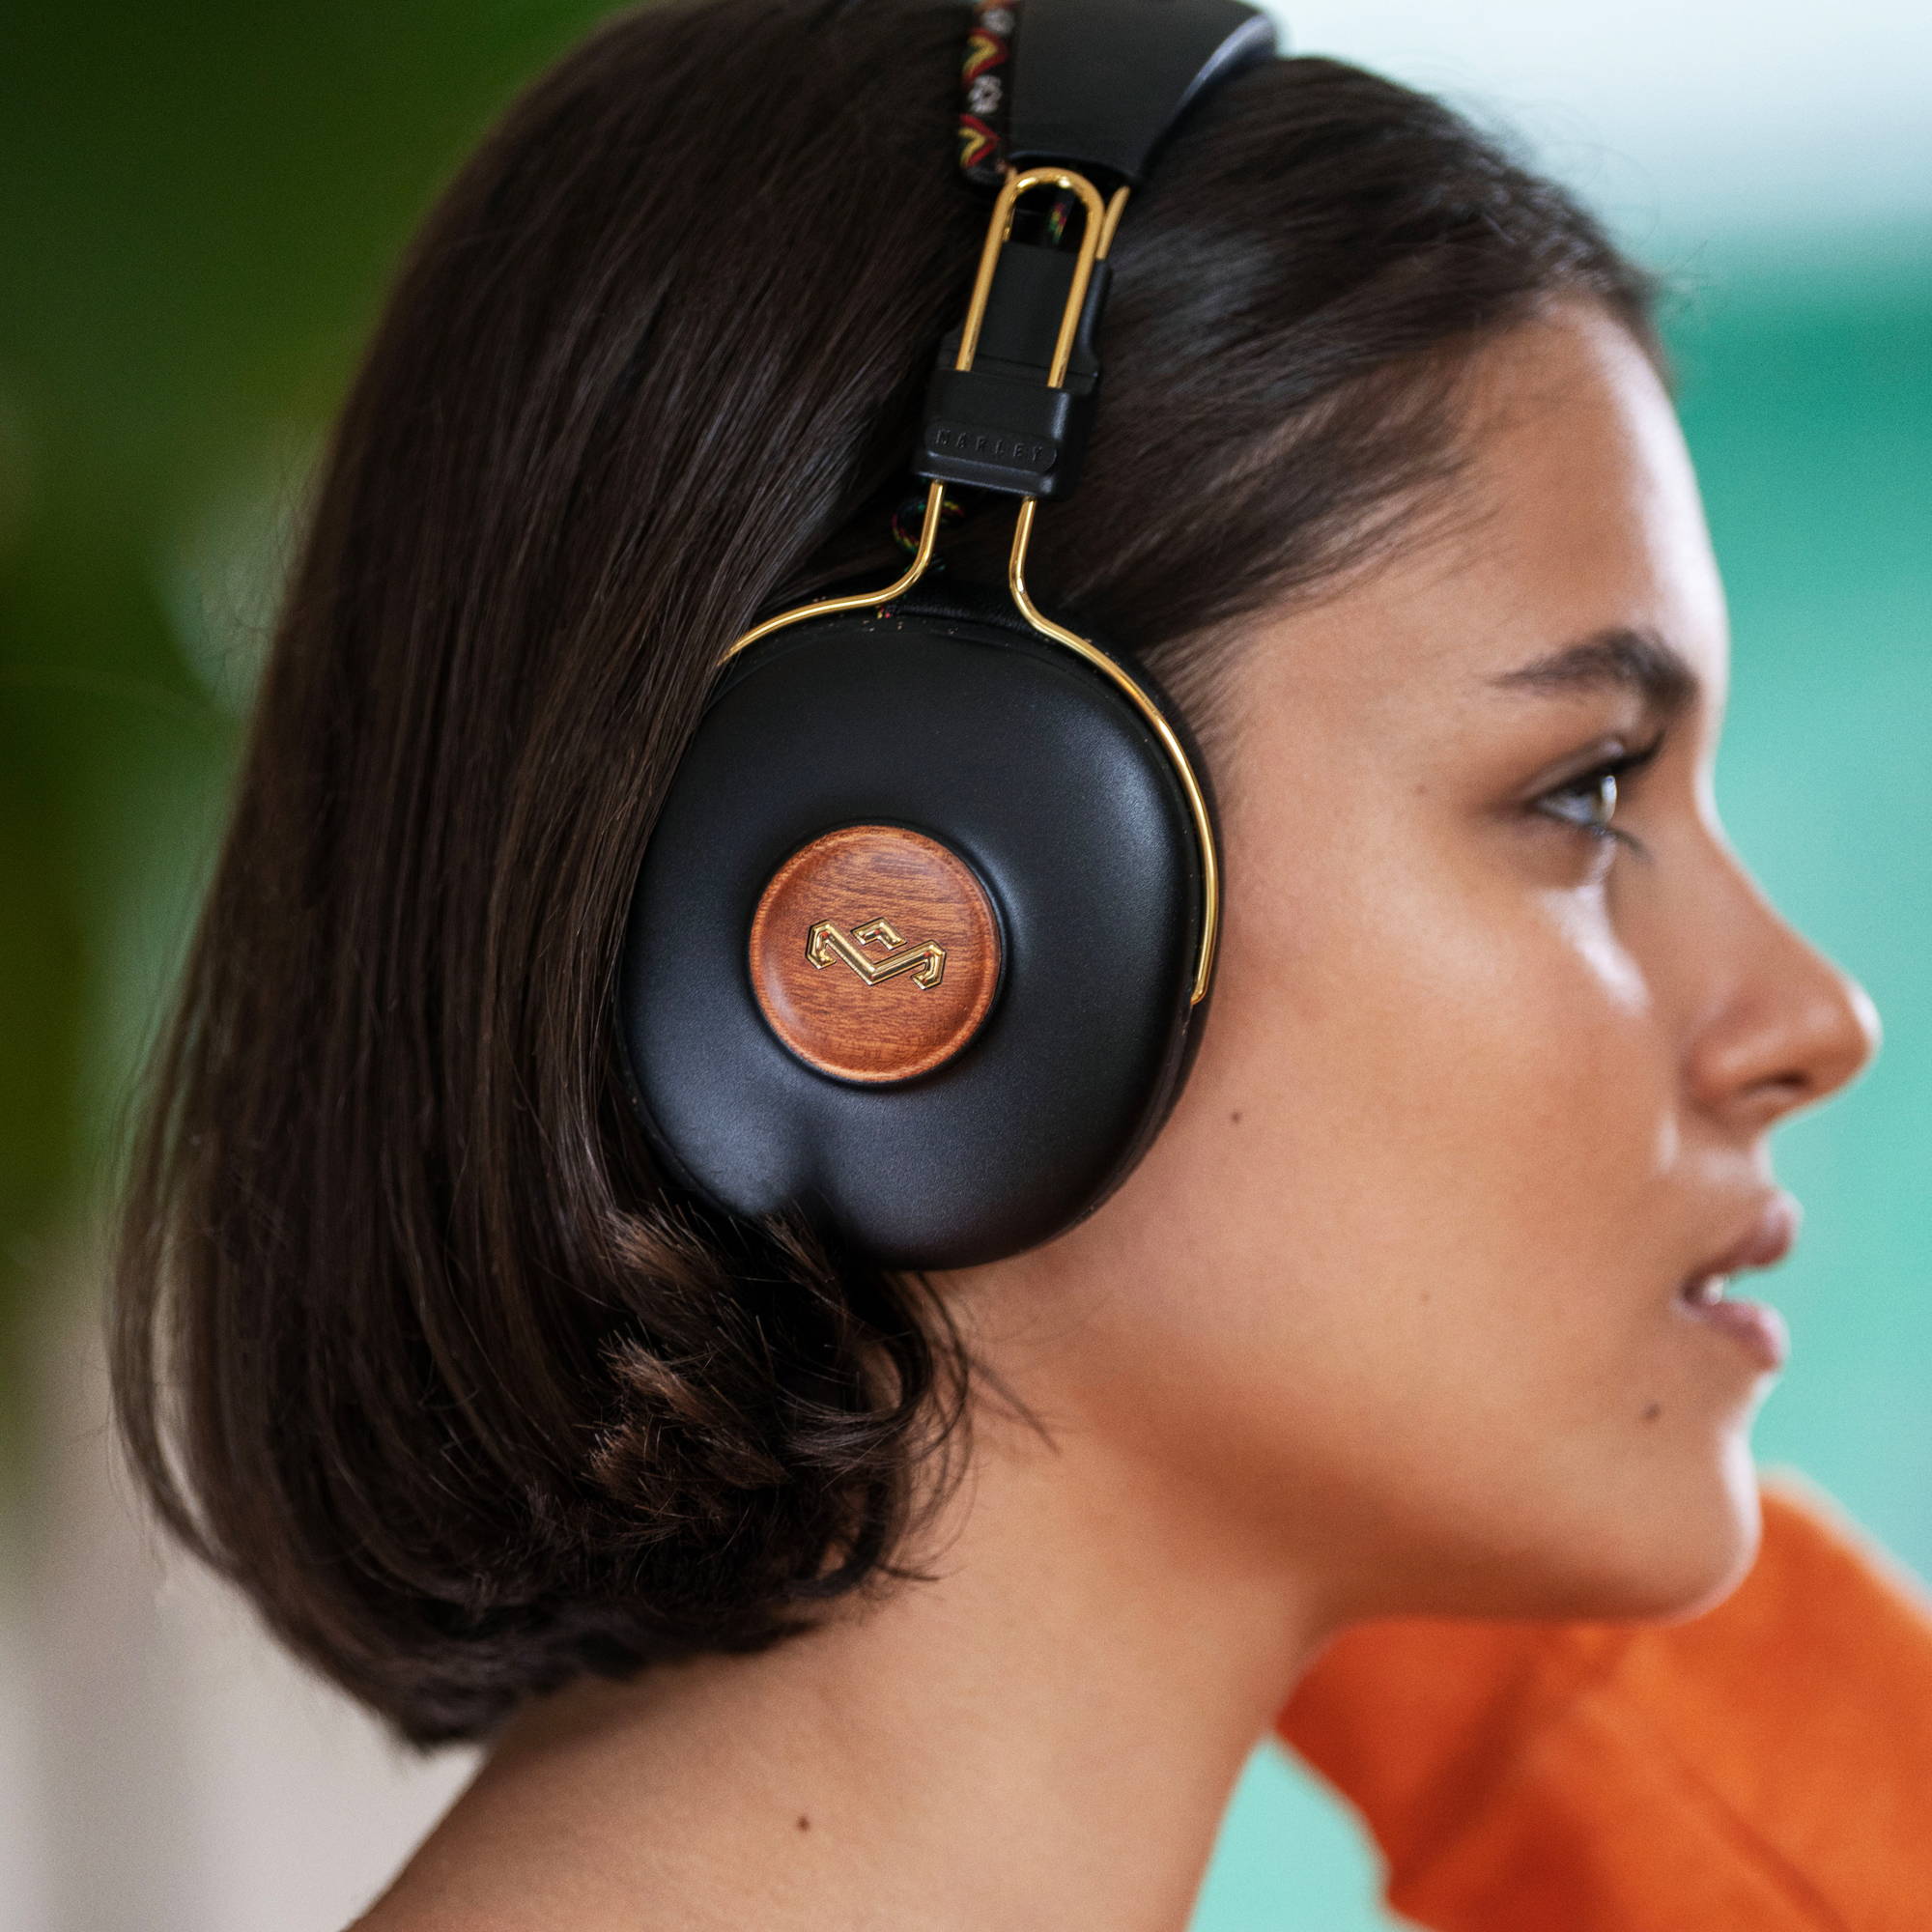 Hands-on Review: House of Marley Wireless Accessories